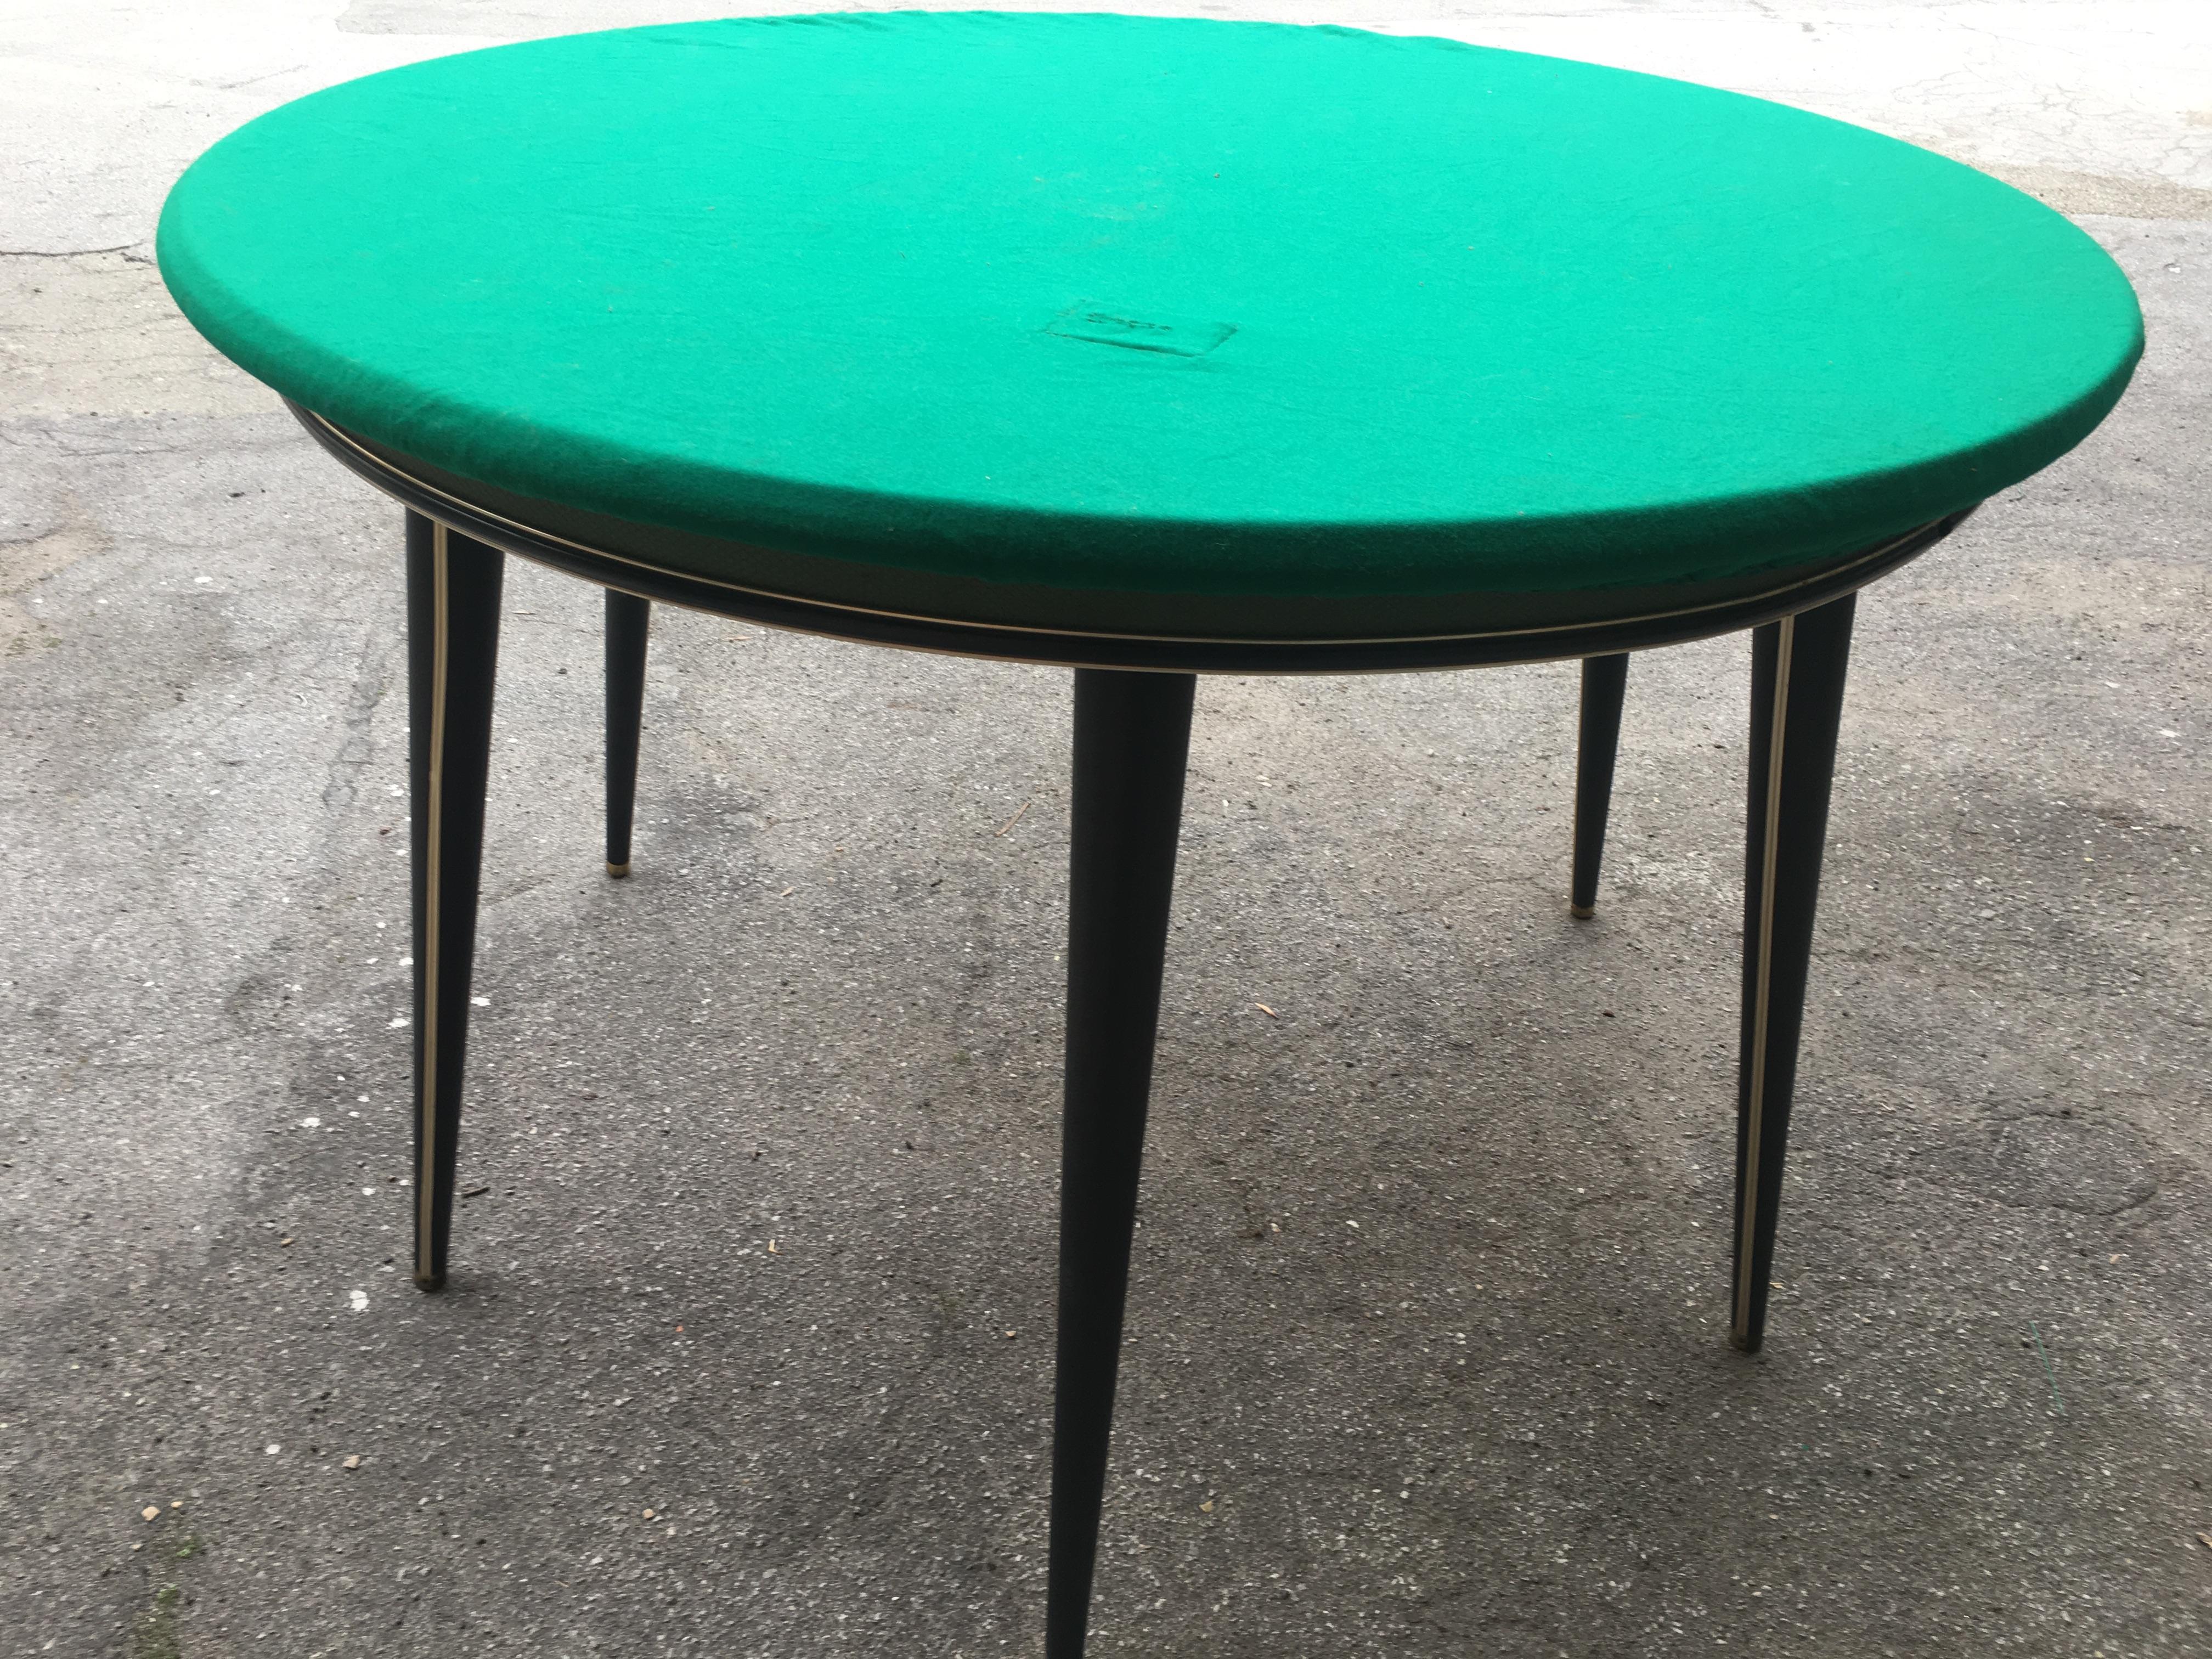 Mid-Century Modern Italian Umberto Mascagni Green and Black Round Table, 1960s For Sale 5